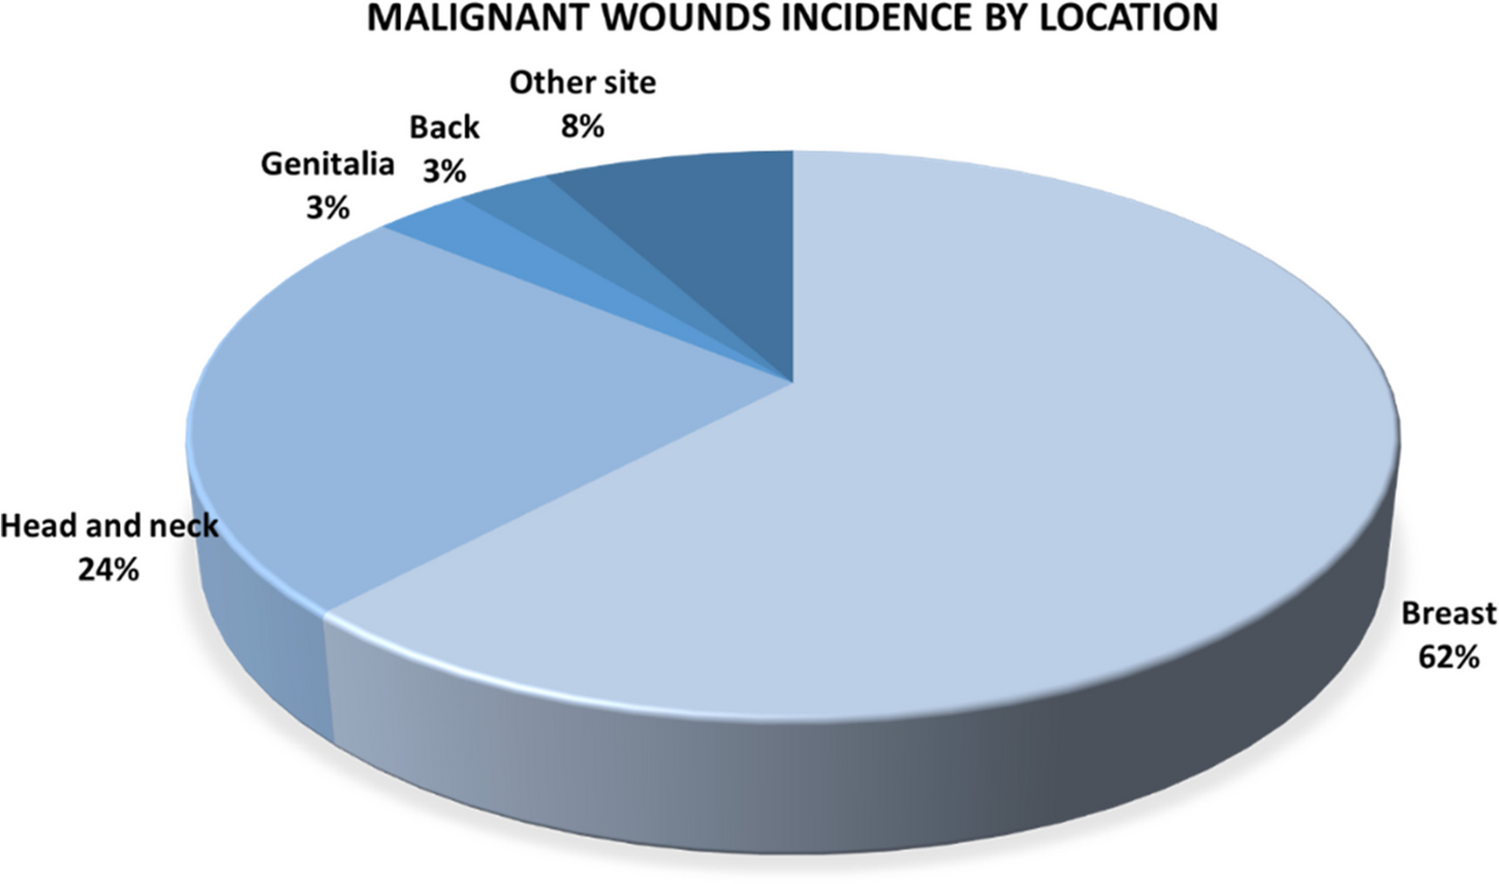 Therapeutic Management of Malignant Wounds: An Update